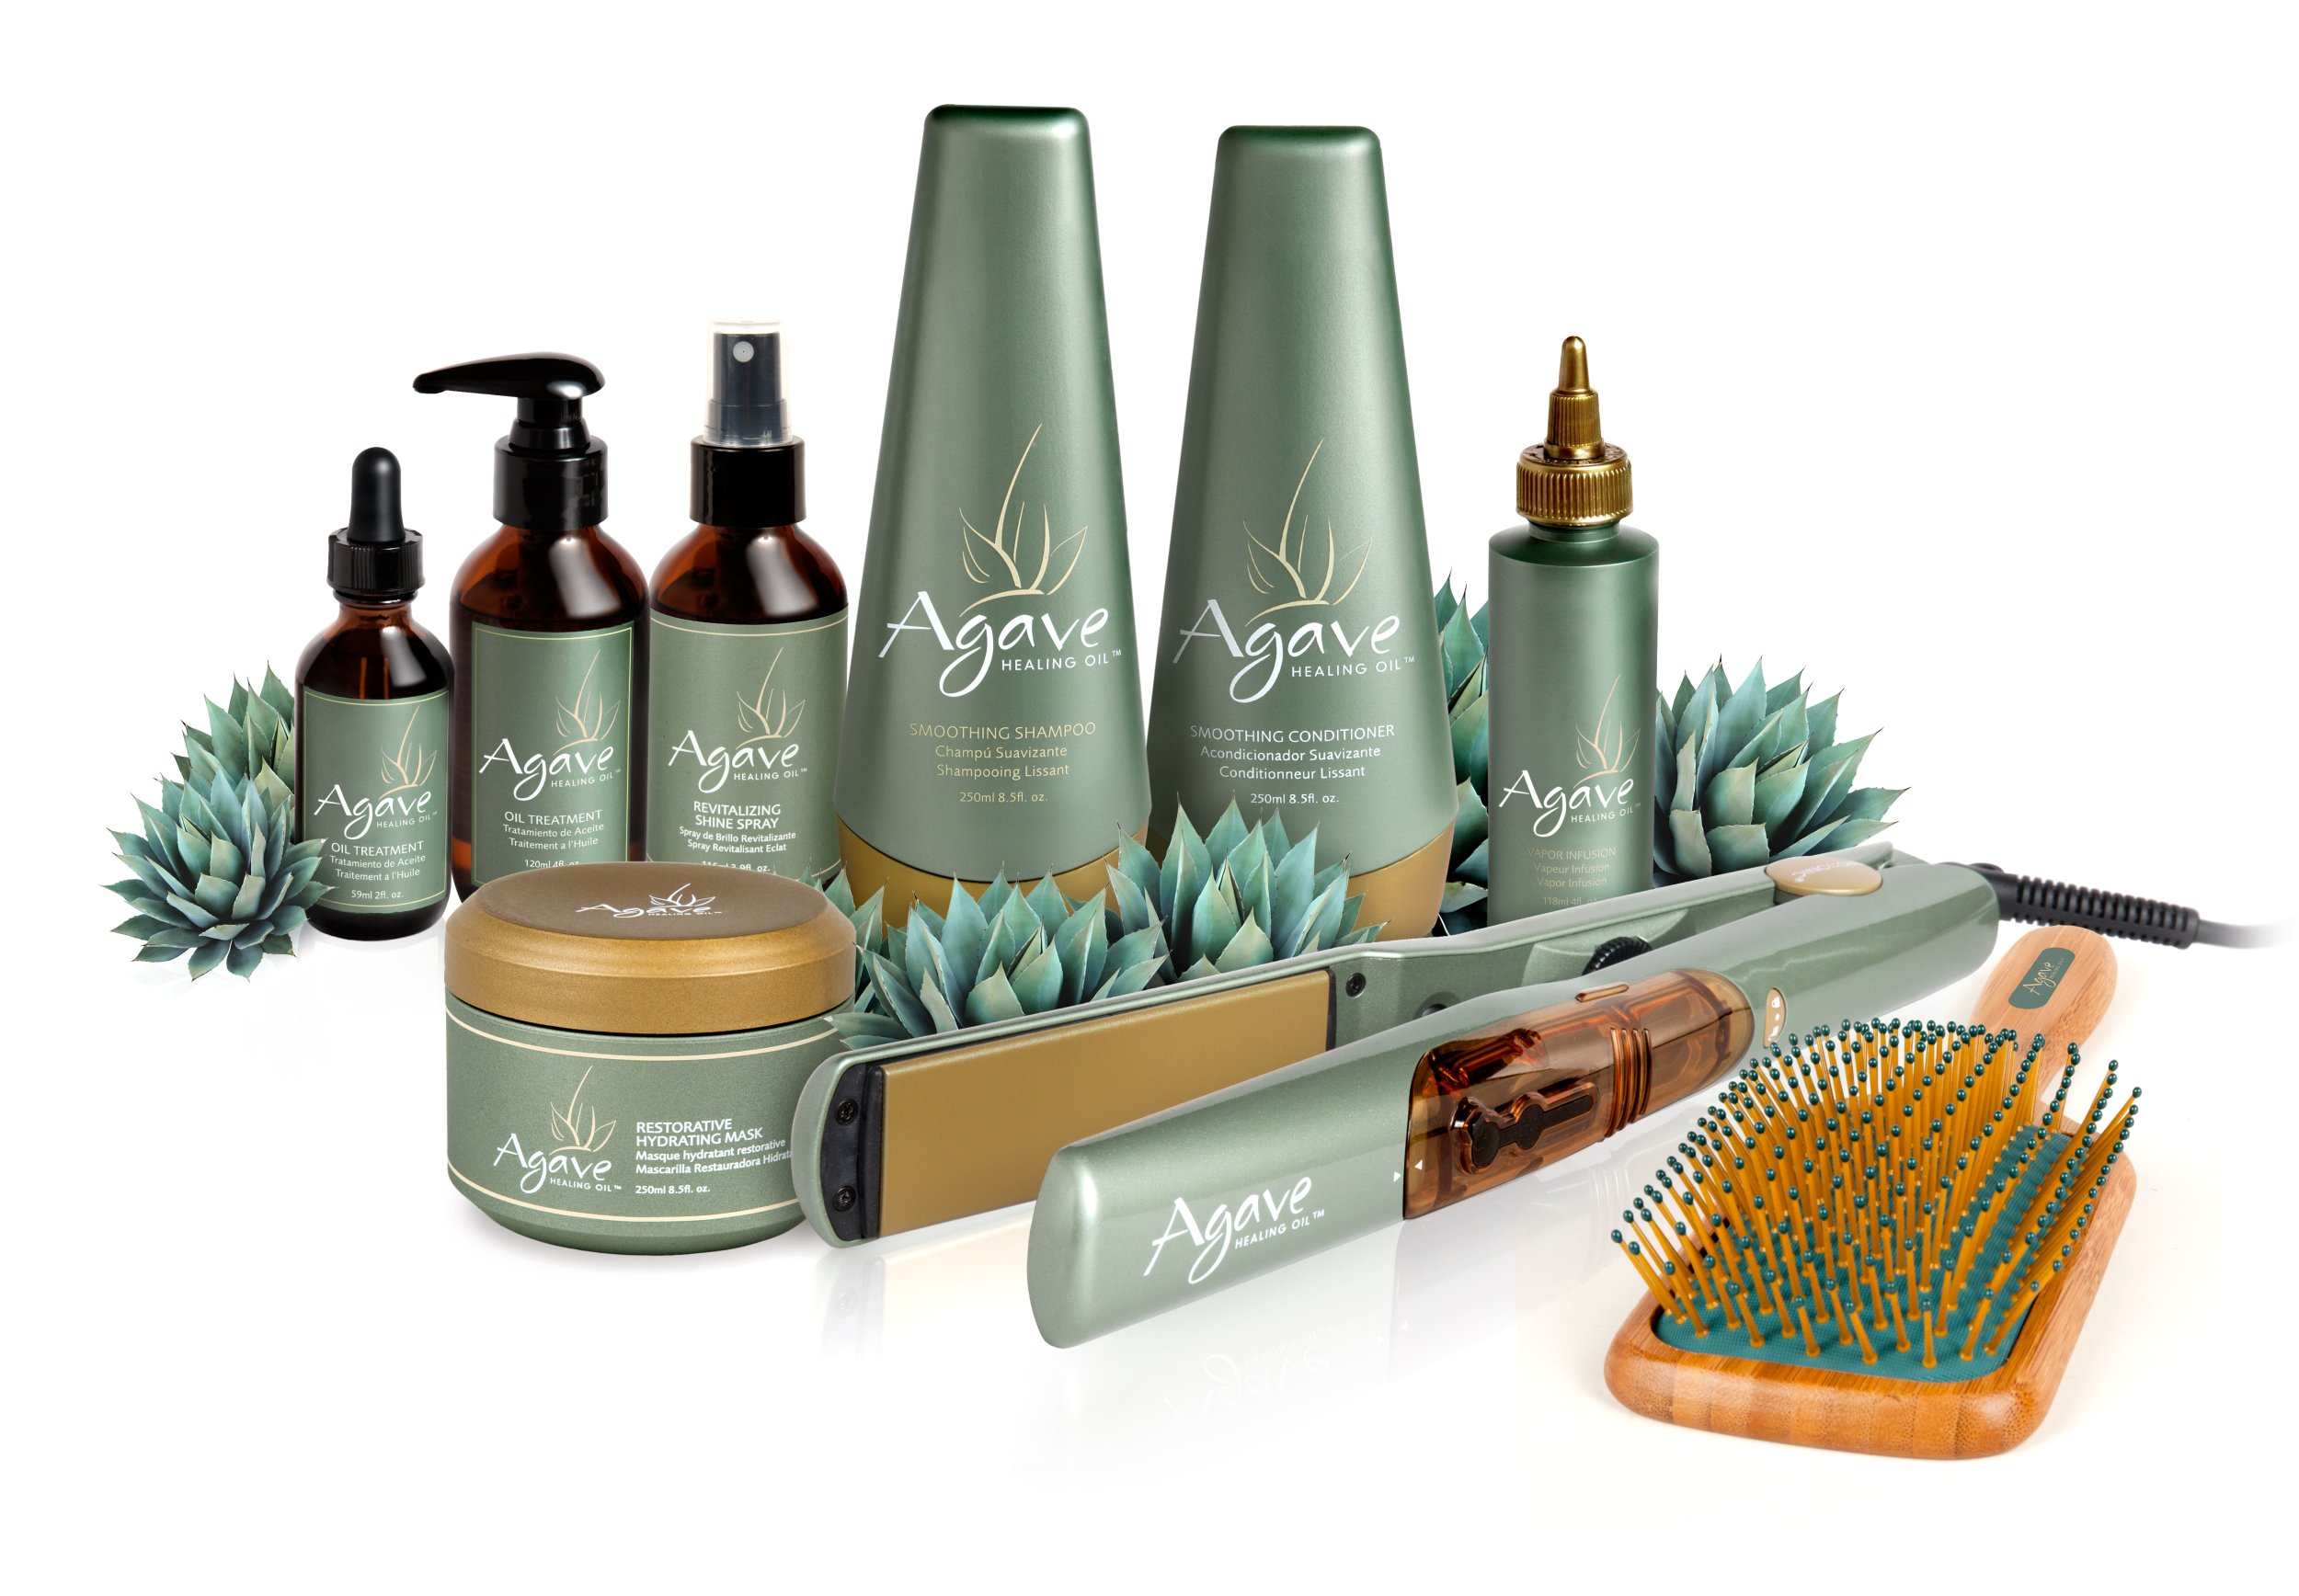 Agave Hair Line Launches 3 New Products Featuring Mexico's Blue Webber Plant